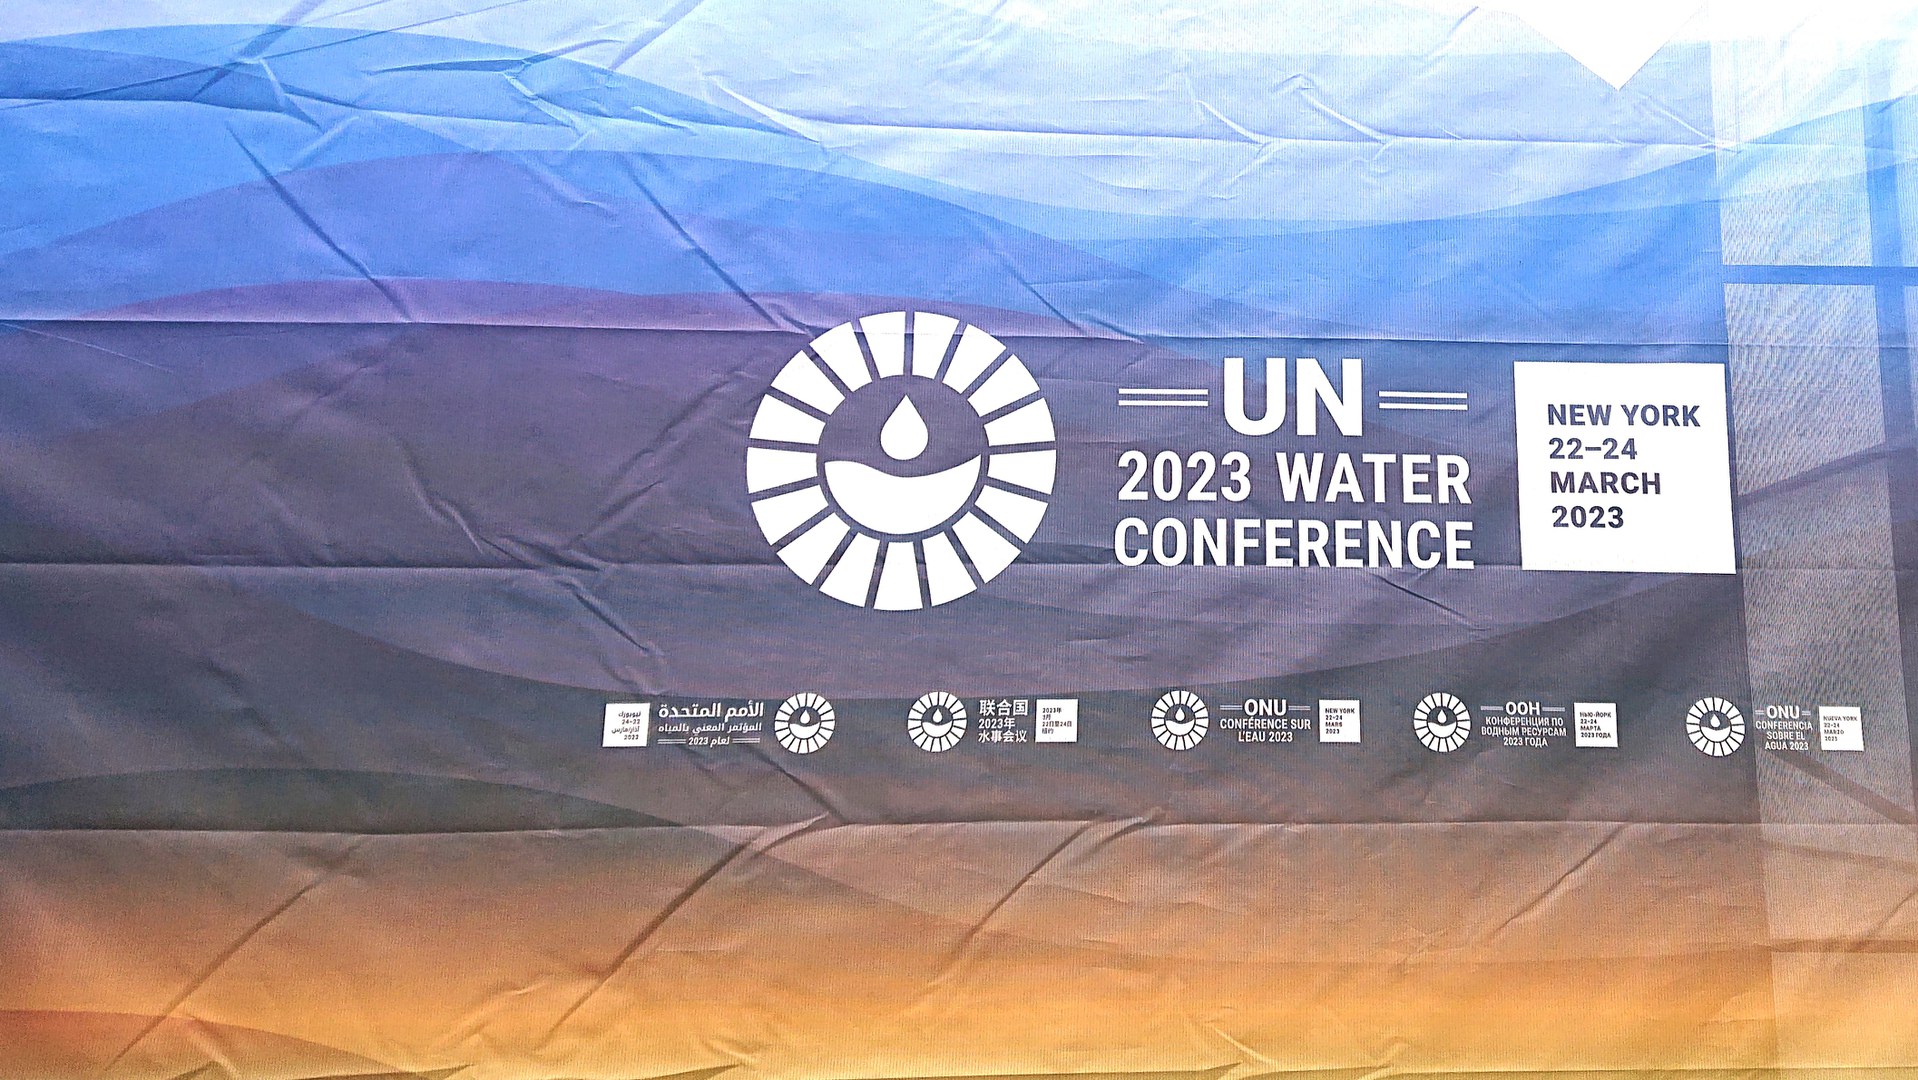 The UN Water Conference, held at the United Nations headquarters in New York March 22-24, was attended by Prof. Dr. Mariele Evers, who is the UNESCO Chair for Human-Water Systems at the University of Bonn Department of Geography.